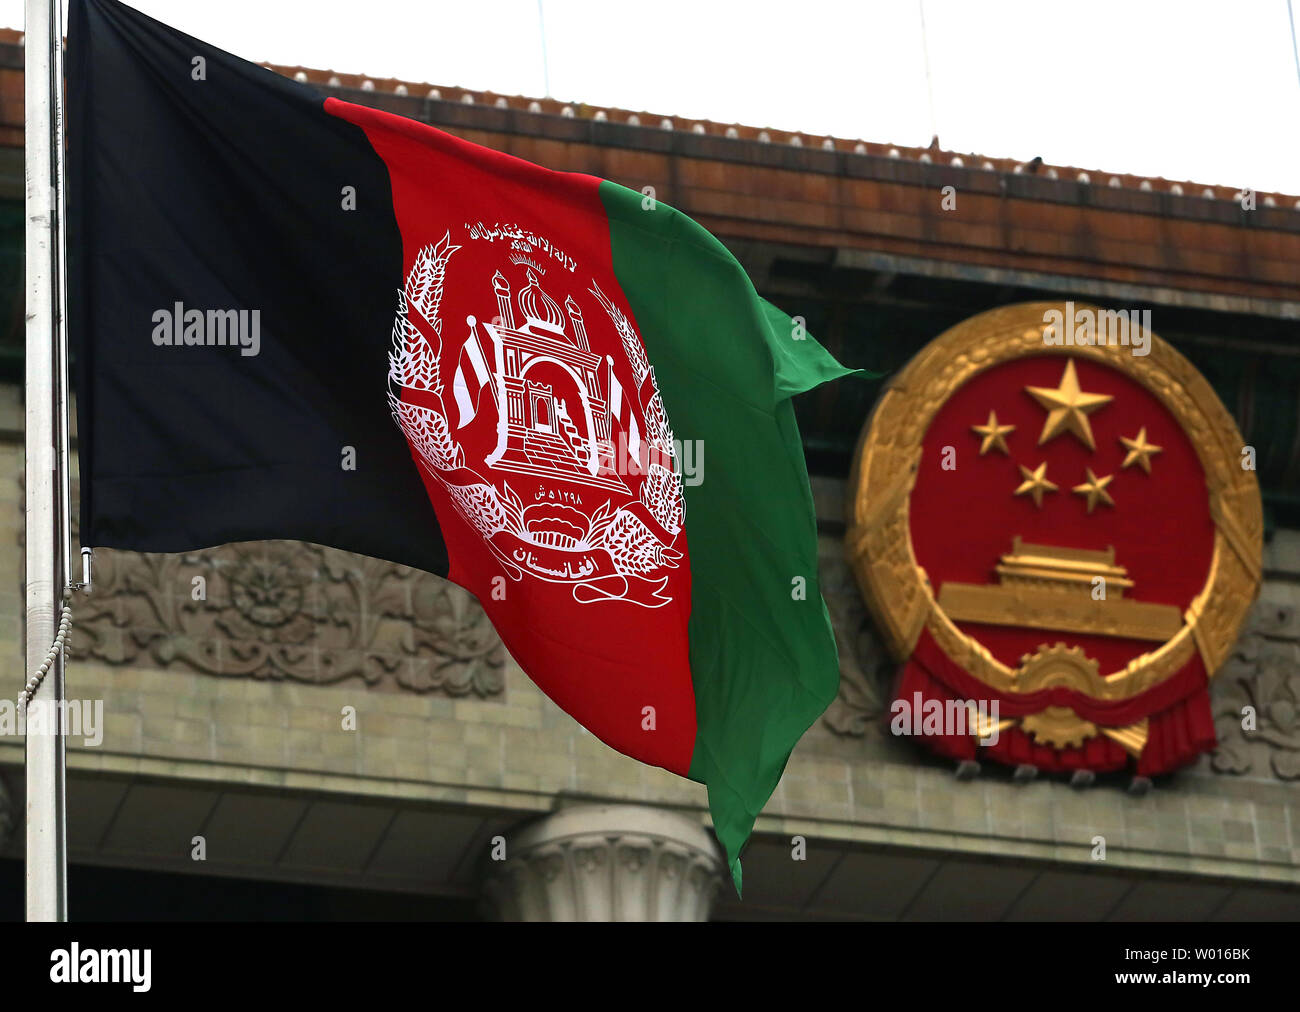 Afghanistan's national flag greets the new Afghan President Ashraf Ghani Ahmadzai and Chinese President Xi Jinping as they attend a welcoming ceremony at the Great Hall of the People in Beijing on October 28, 2014.  The Afghan President is visiting China to seek help in rebuilding his country and boosting regional stability.       UPI/Stephen Shaver Stock Photo